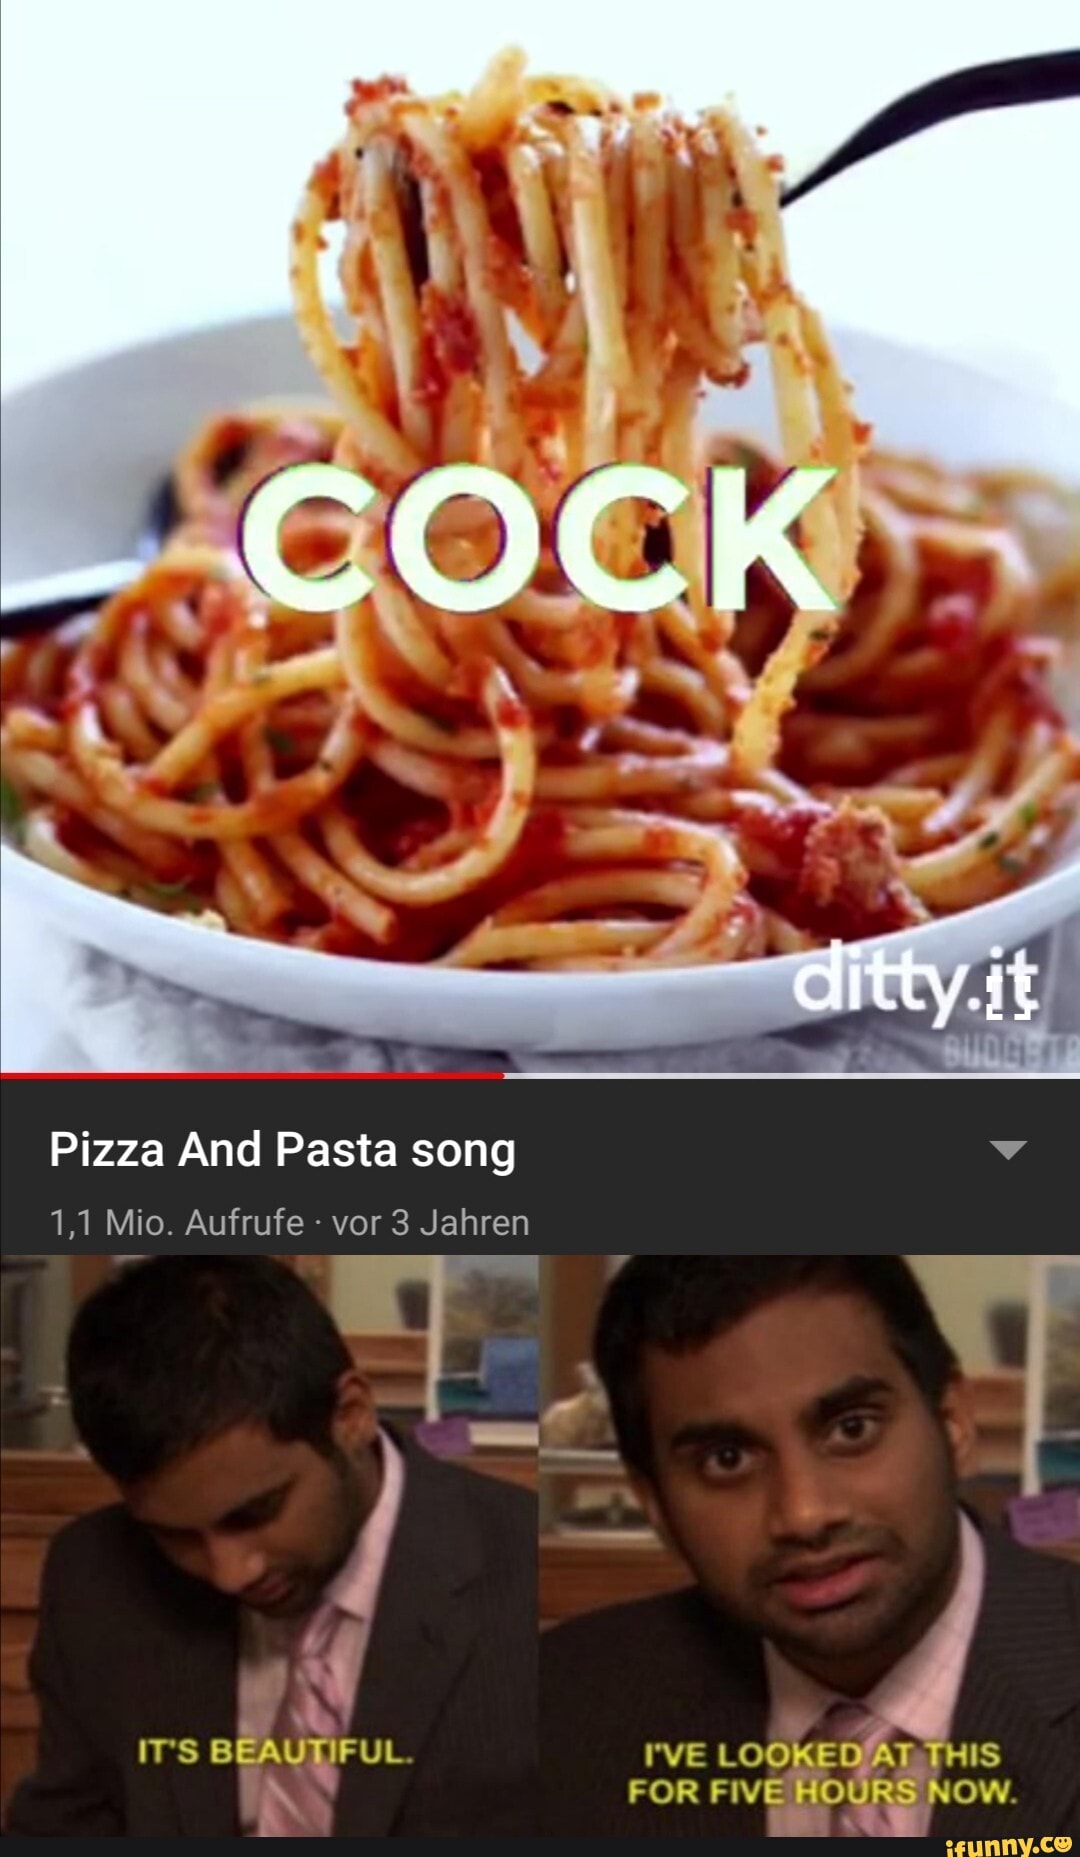 COCK  Pizza And Pasta song 1,1 Mio. Aufrufe - vor 3 Jahren ITS BEAU  I'VE LOOKED AT THIS FOR FIVE HOURS NOW. - iFunny